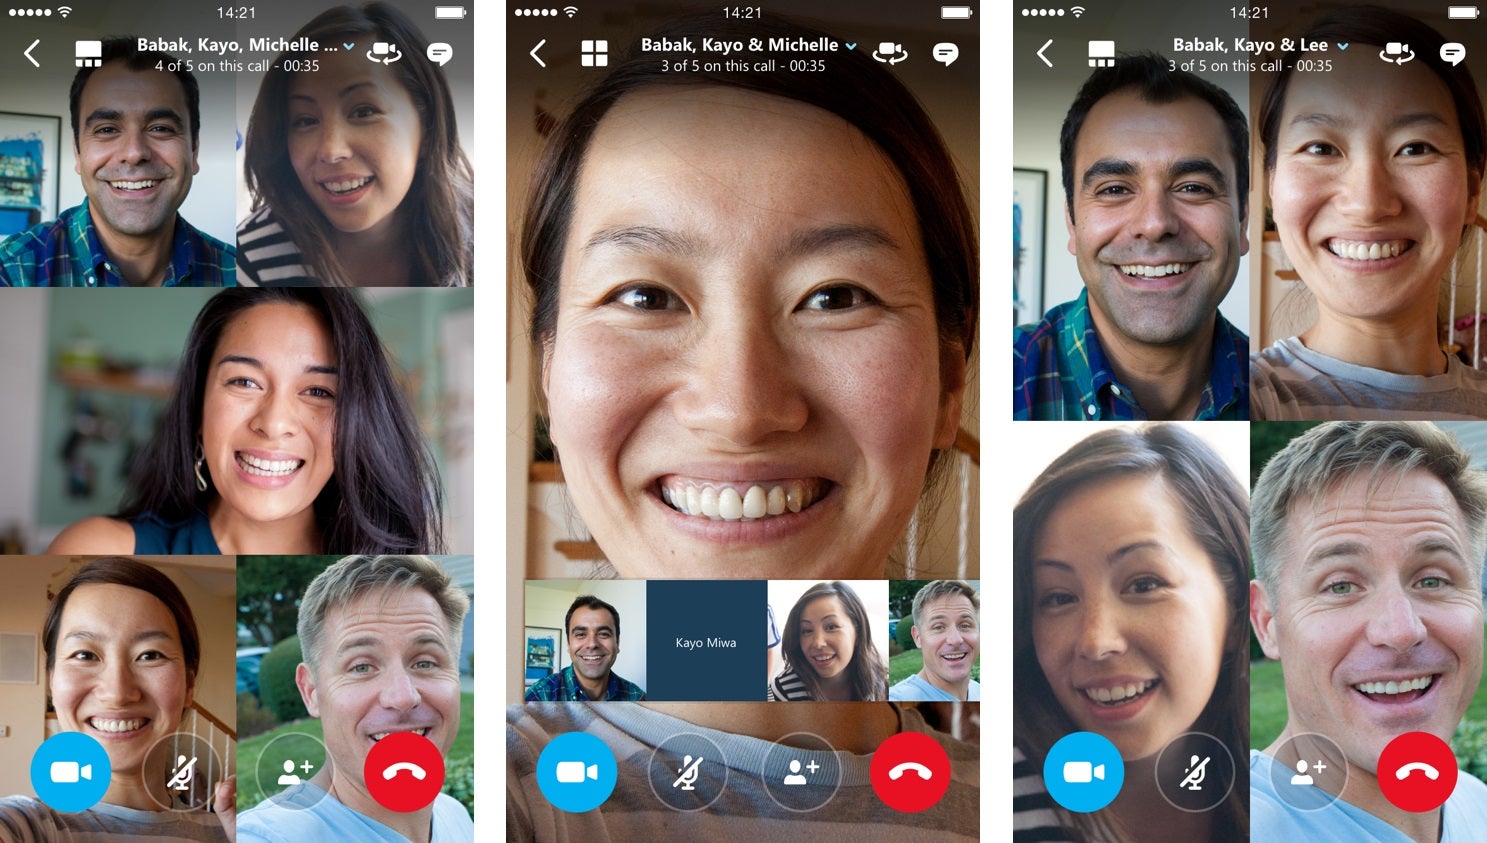 Skype update for iOS adds native Office support, group video calling, and other goodies